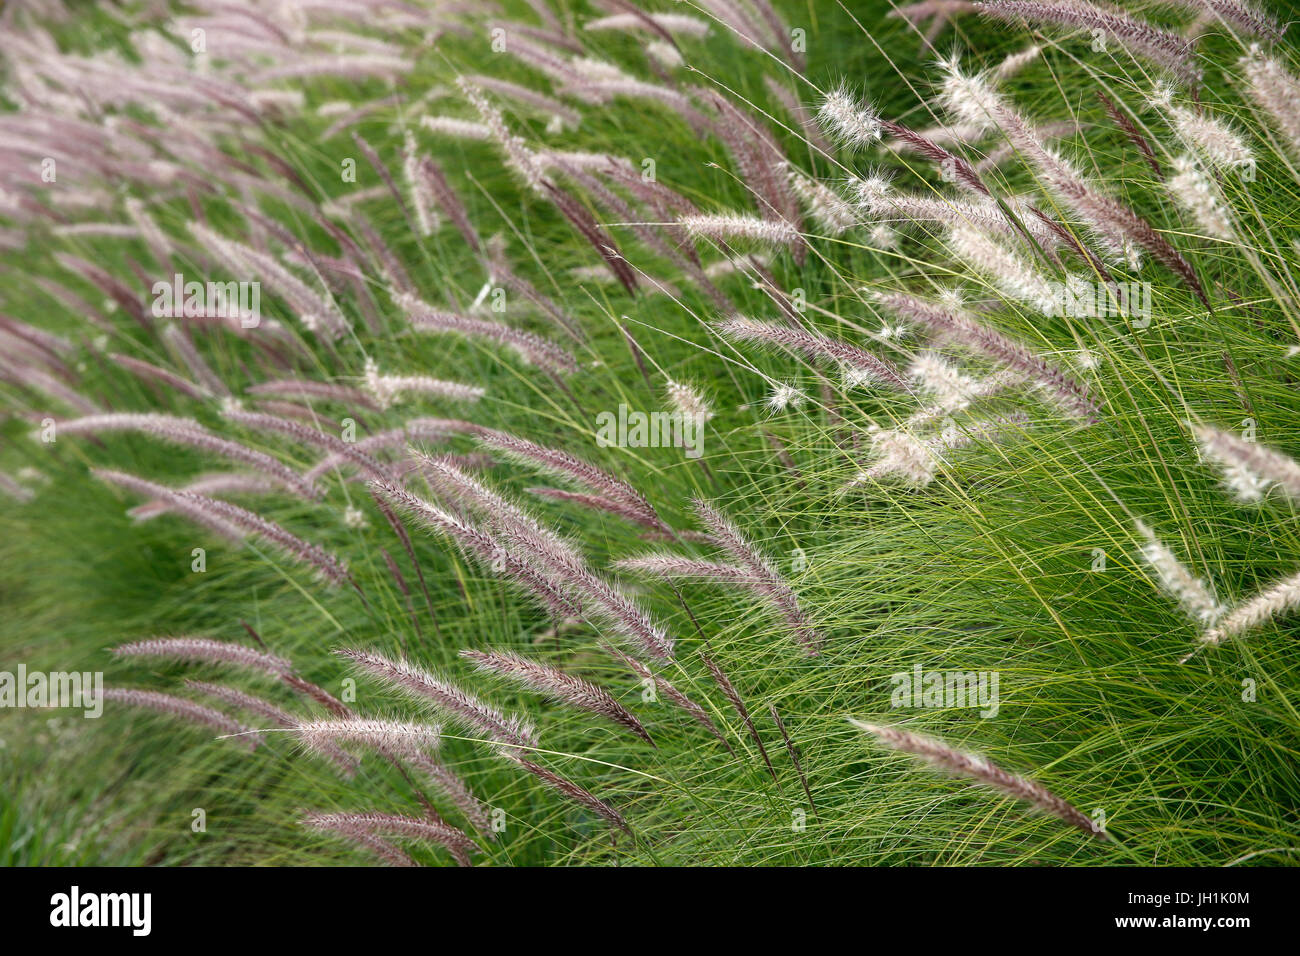 Wild grass in the Memorial Valley at the Peace Memorial in Caen, Normandy. France. Stock Photo